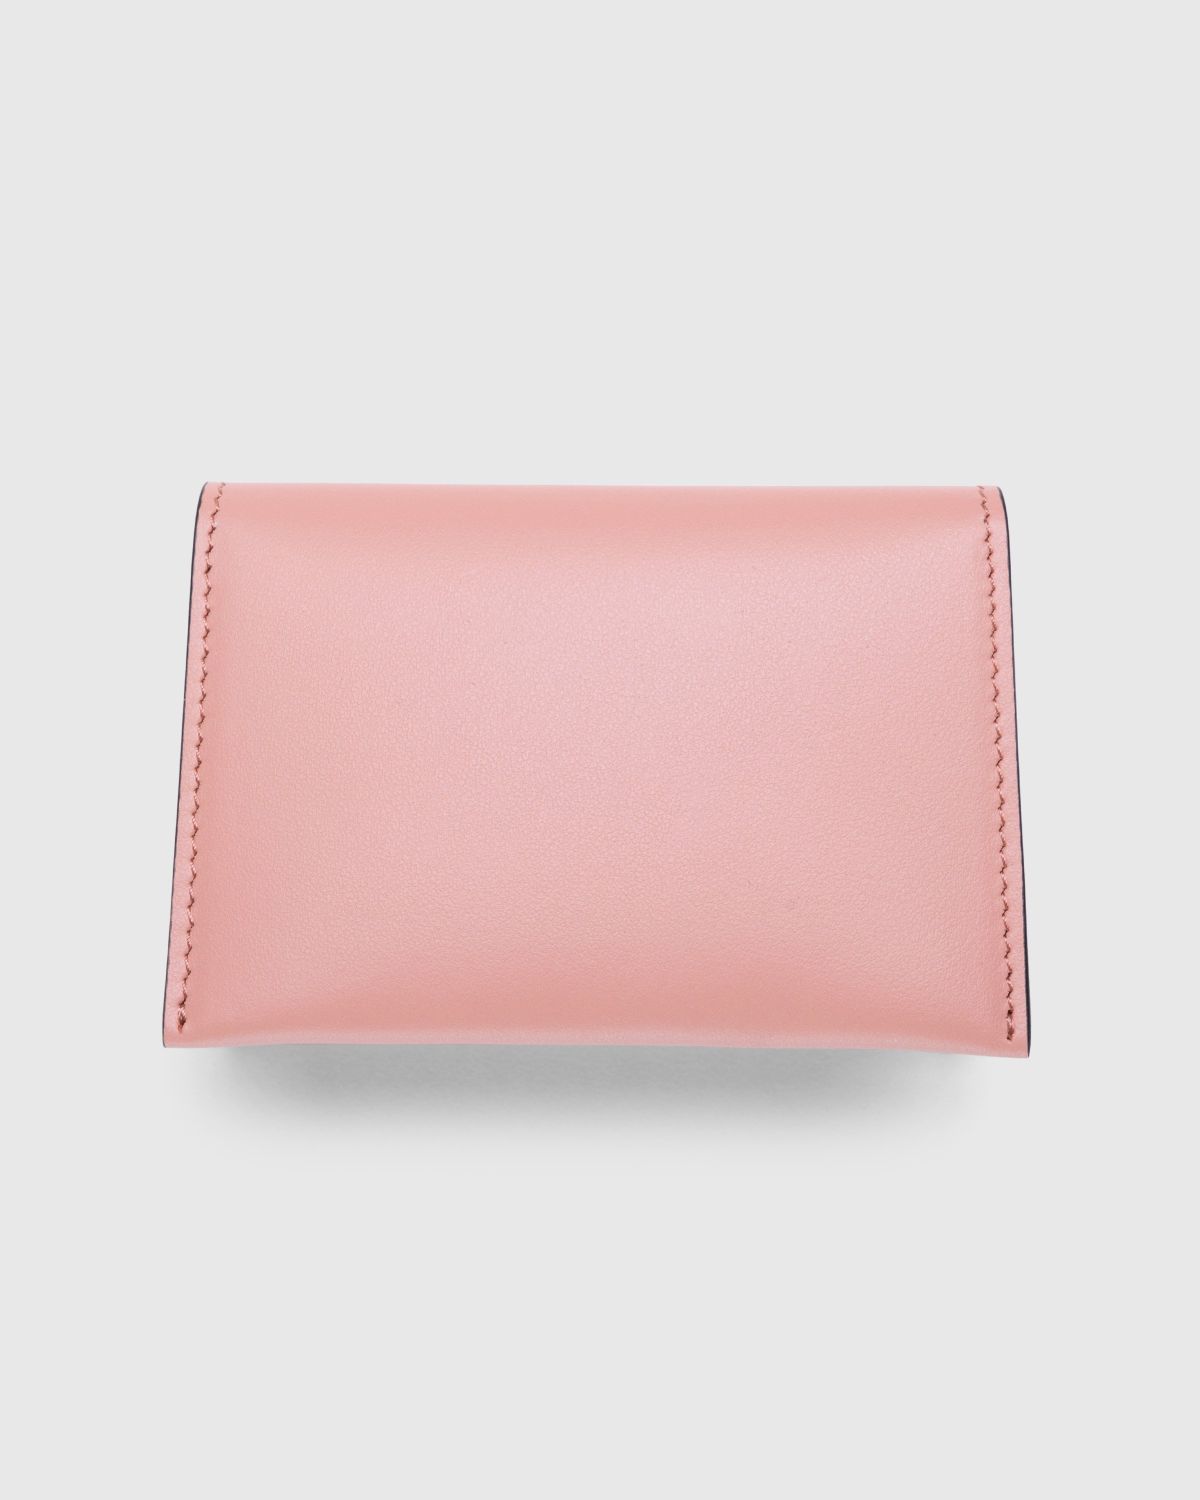 Acne Studios – Folded Leather Card Holder Salmon Pink - Wallets - Pink - Image 3